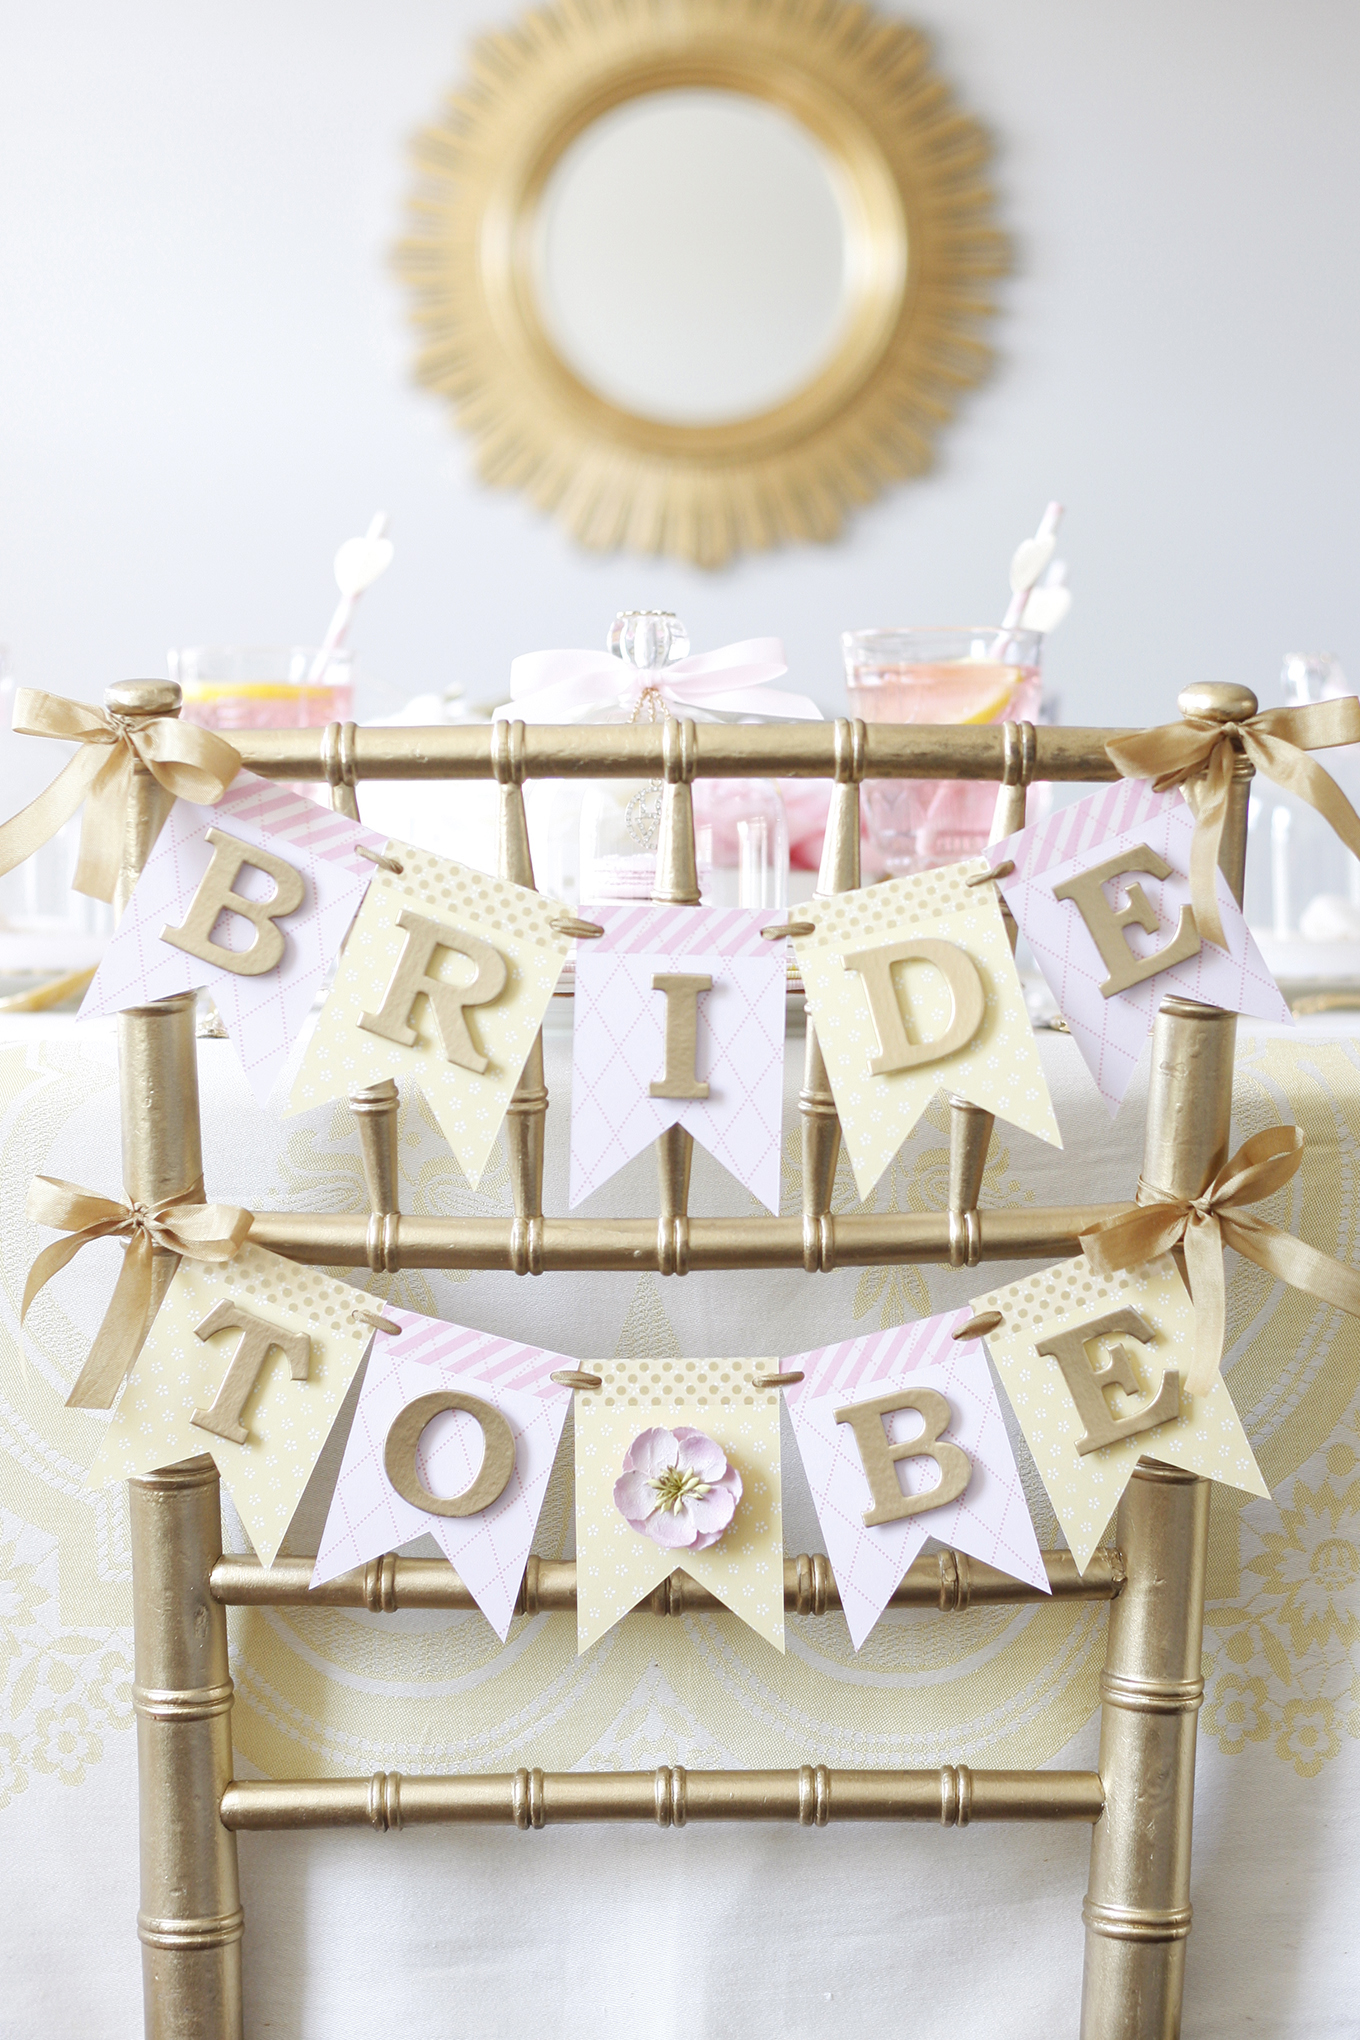 01_Paige Smith_Bride to Be Chair Banner_Wedding Shower_MG_1339